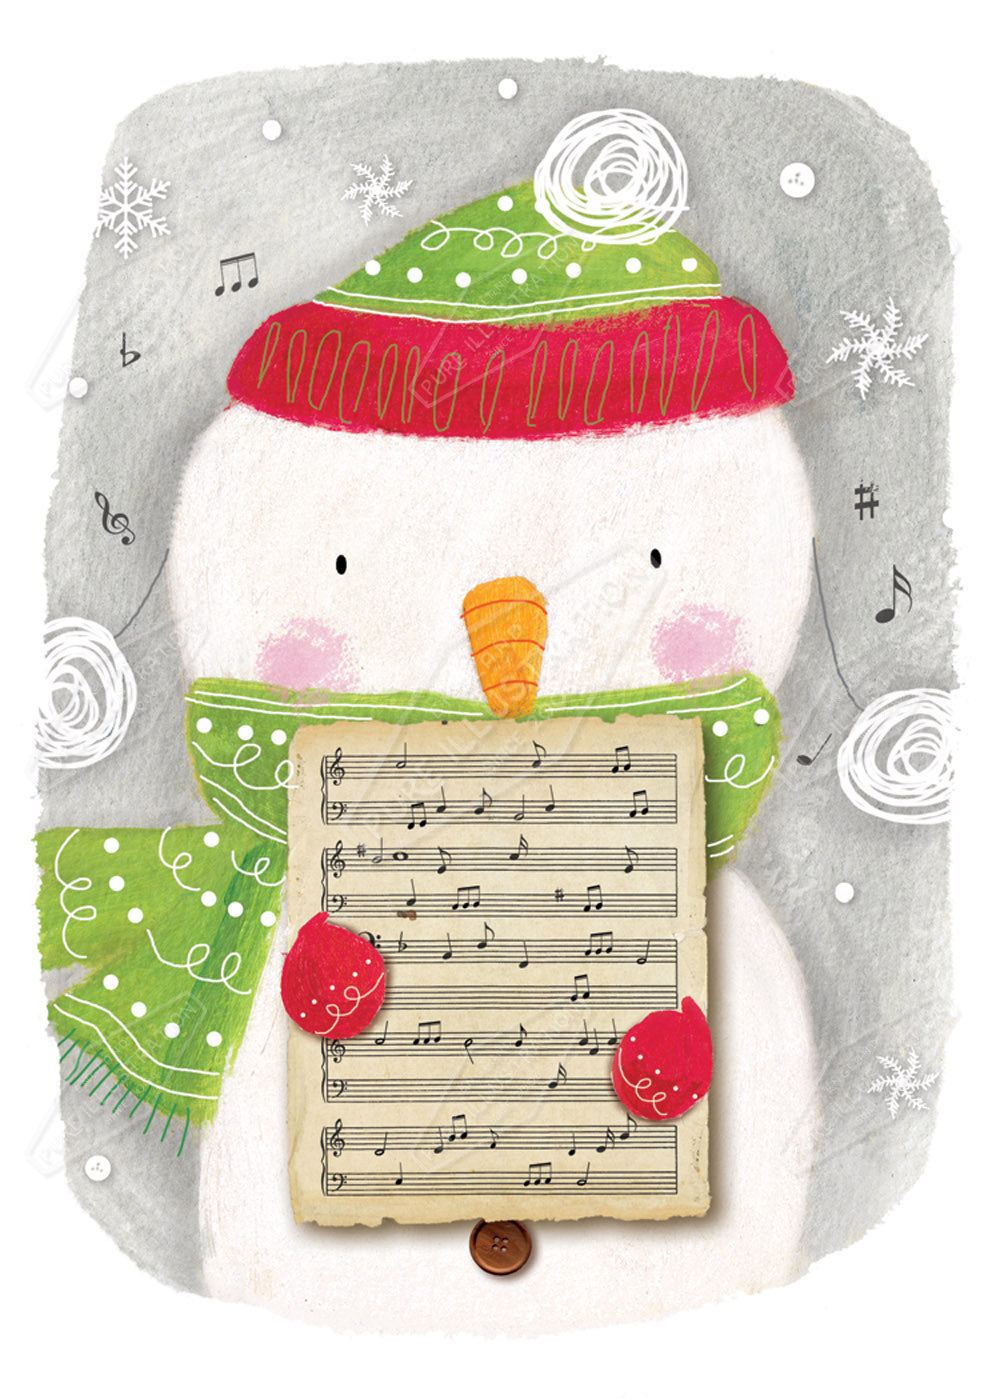 00029572CRE - Snowman by Cory Reid - Pure Art Licensing & Surface Design Agency